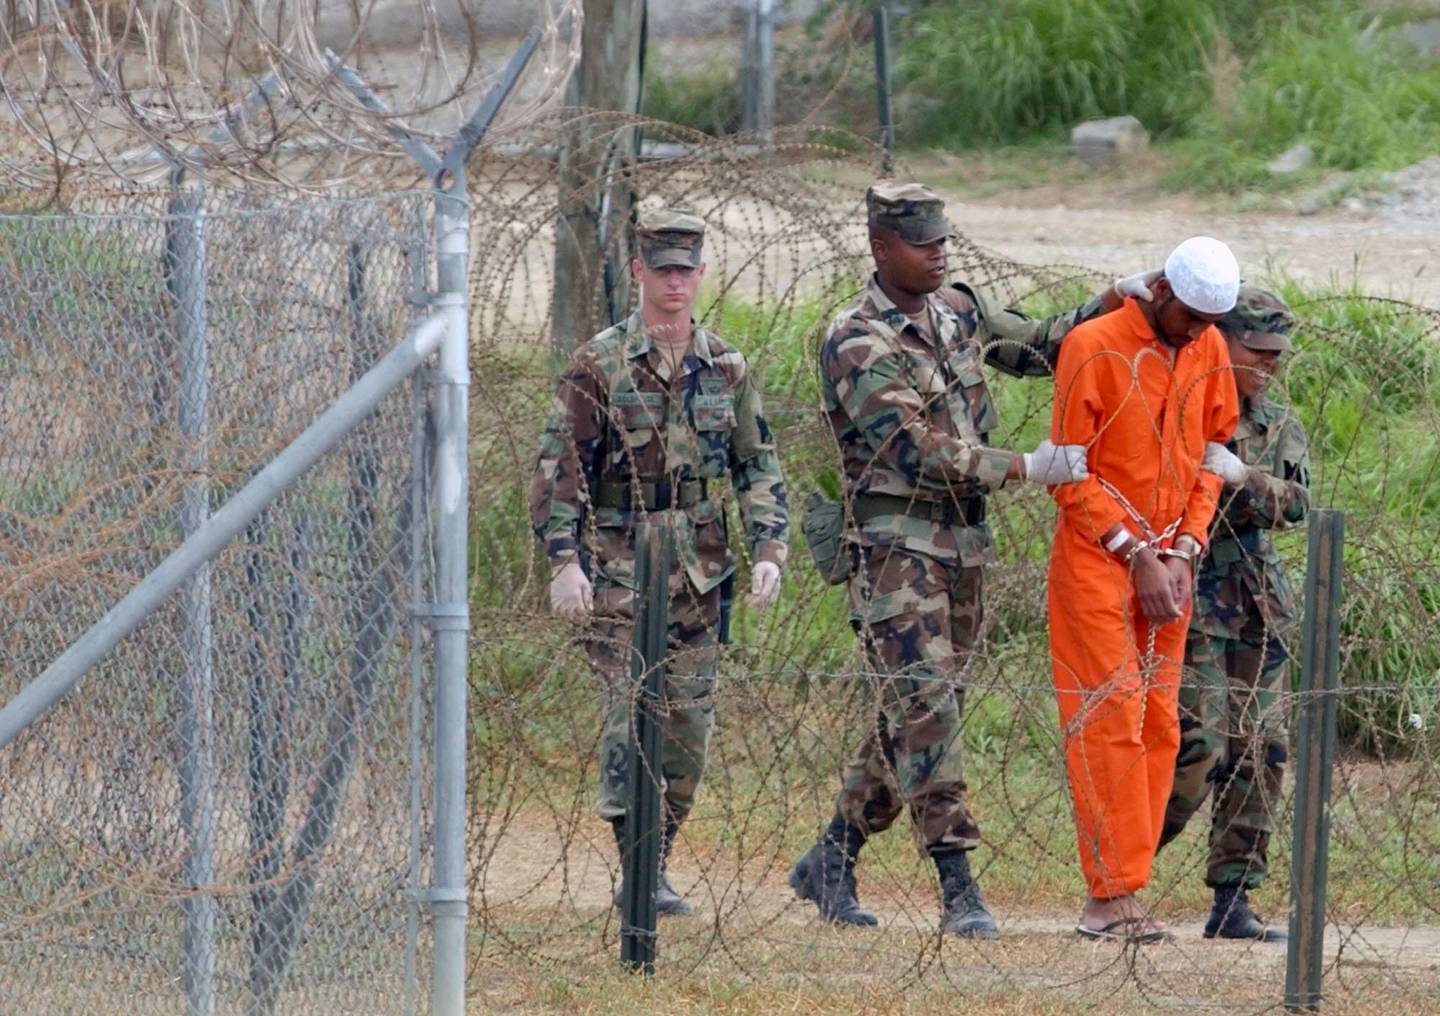 In this February 6, 2002, file photo a detainee is led by military police to be interrogated by military officials at Camp X-Ray at the US Naval Base at Guantanamo Bay, Cuba. AP